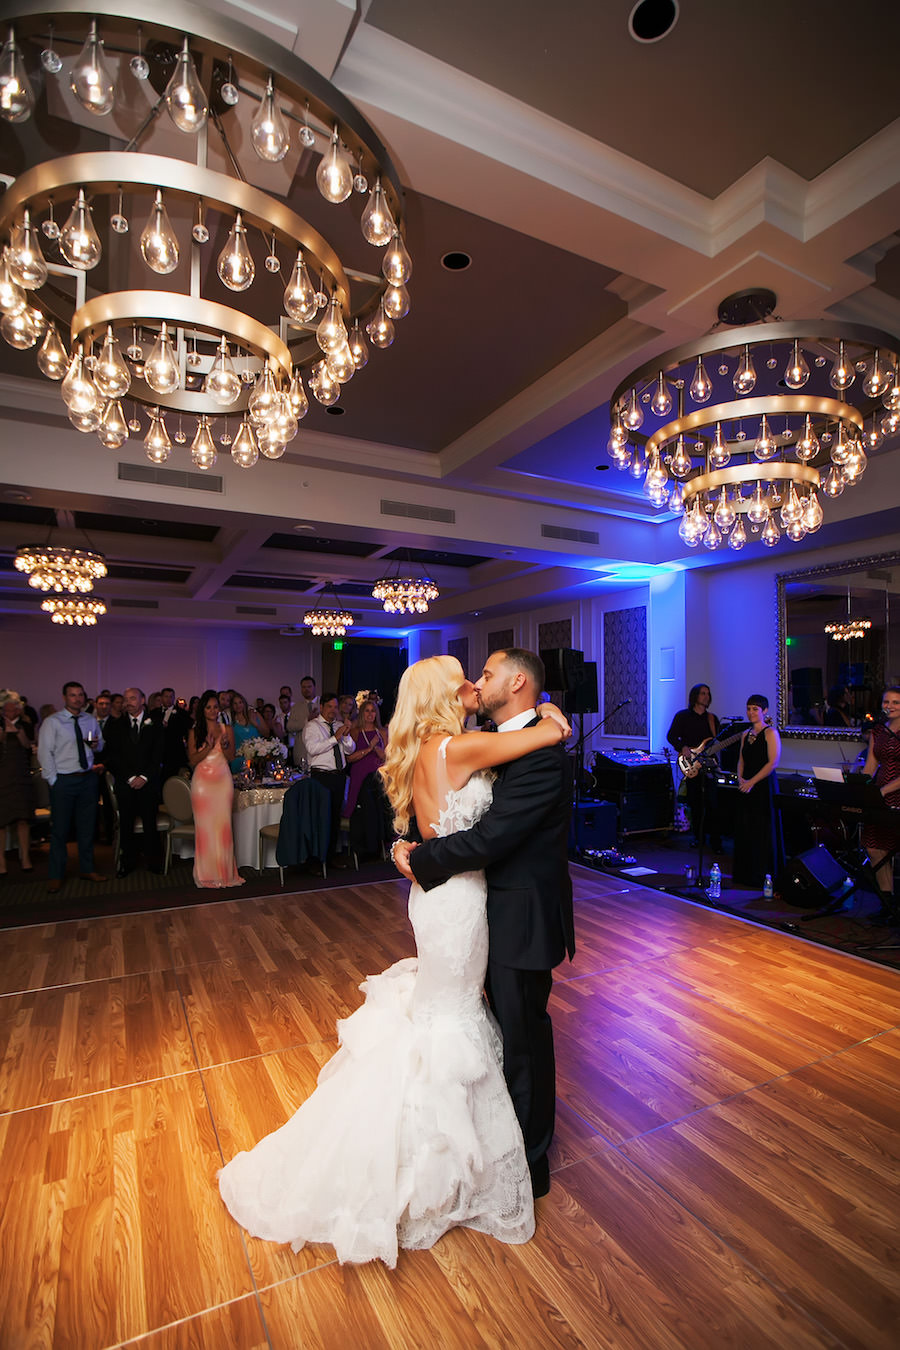 Bride and Groom First Dance | Downtown St. Pete Hotel Wedding Venue The Birchwood| St. Petersburg Wedding Photographer Limelight Photography